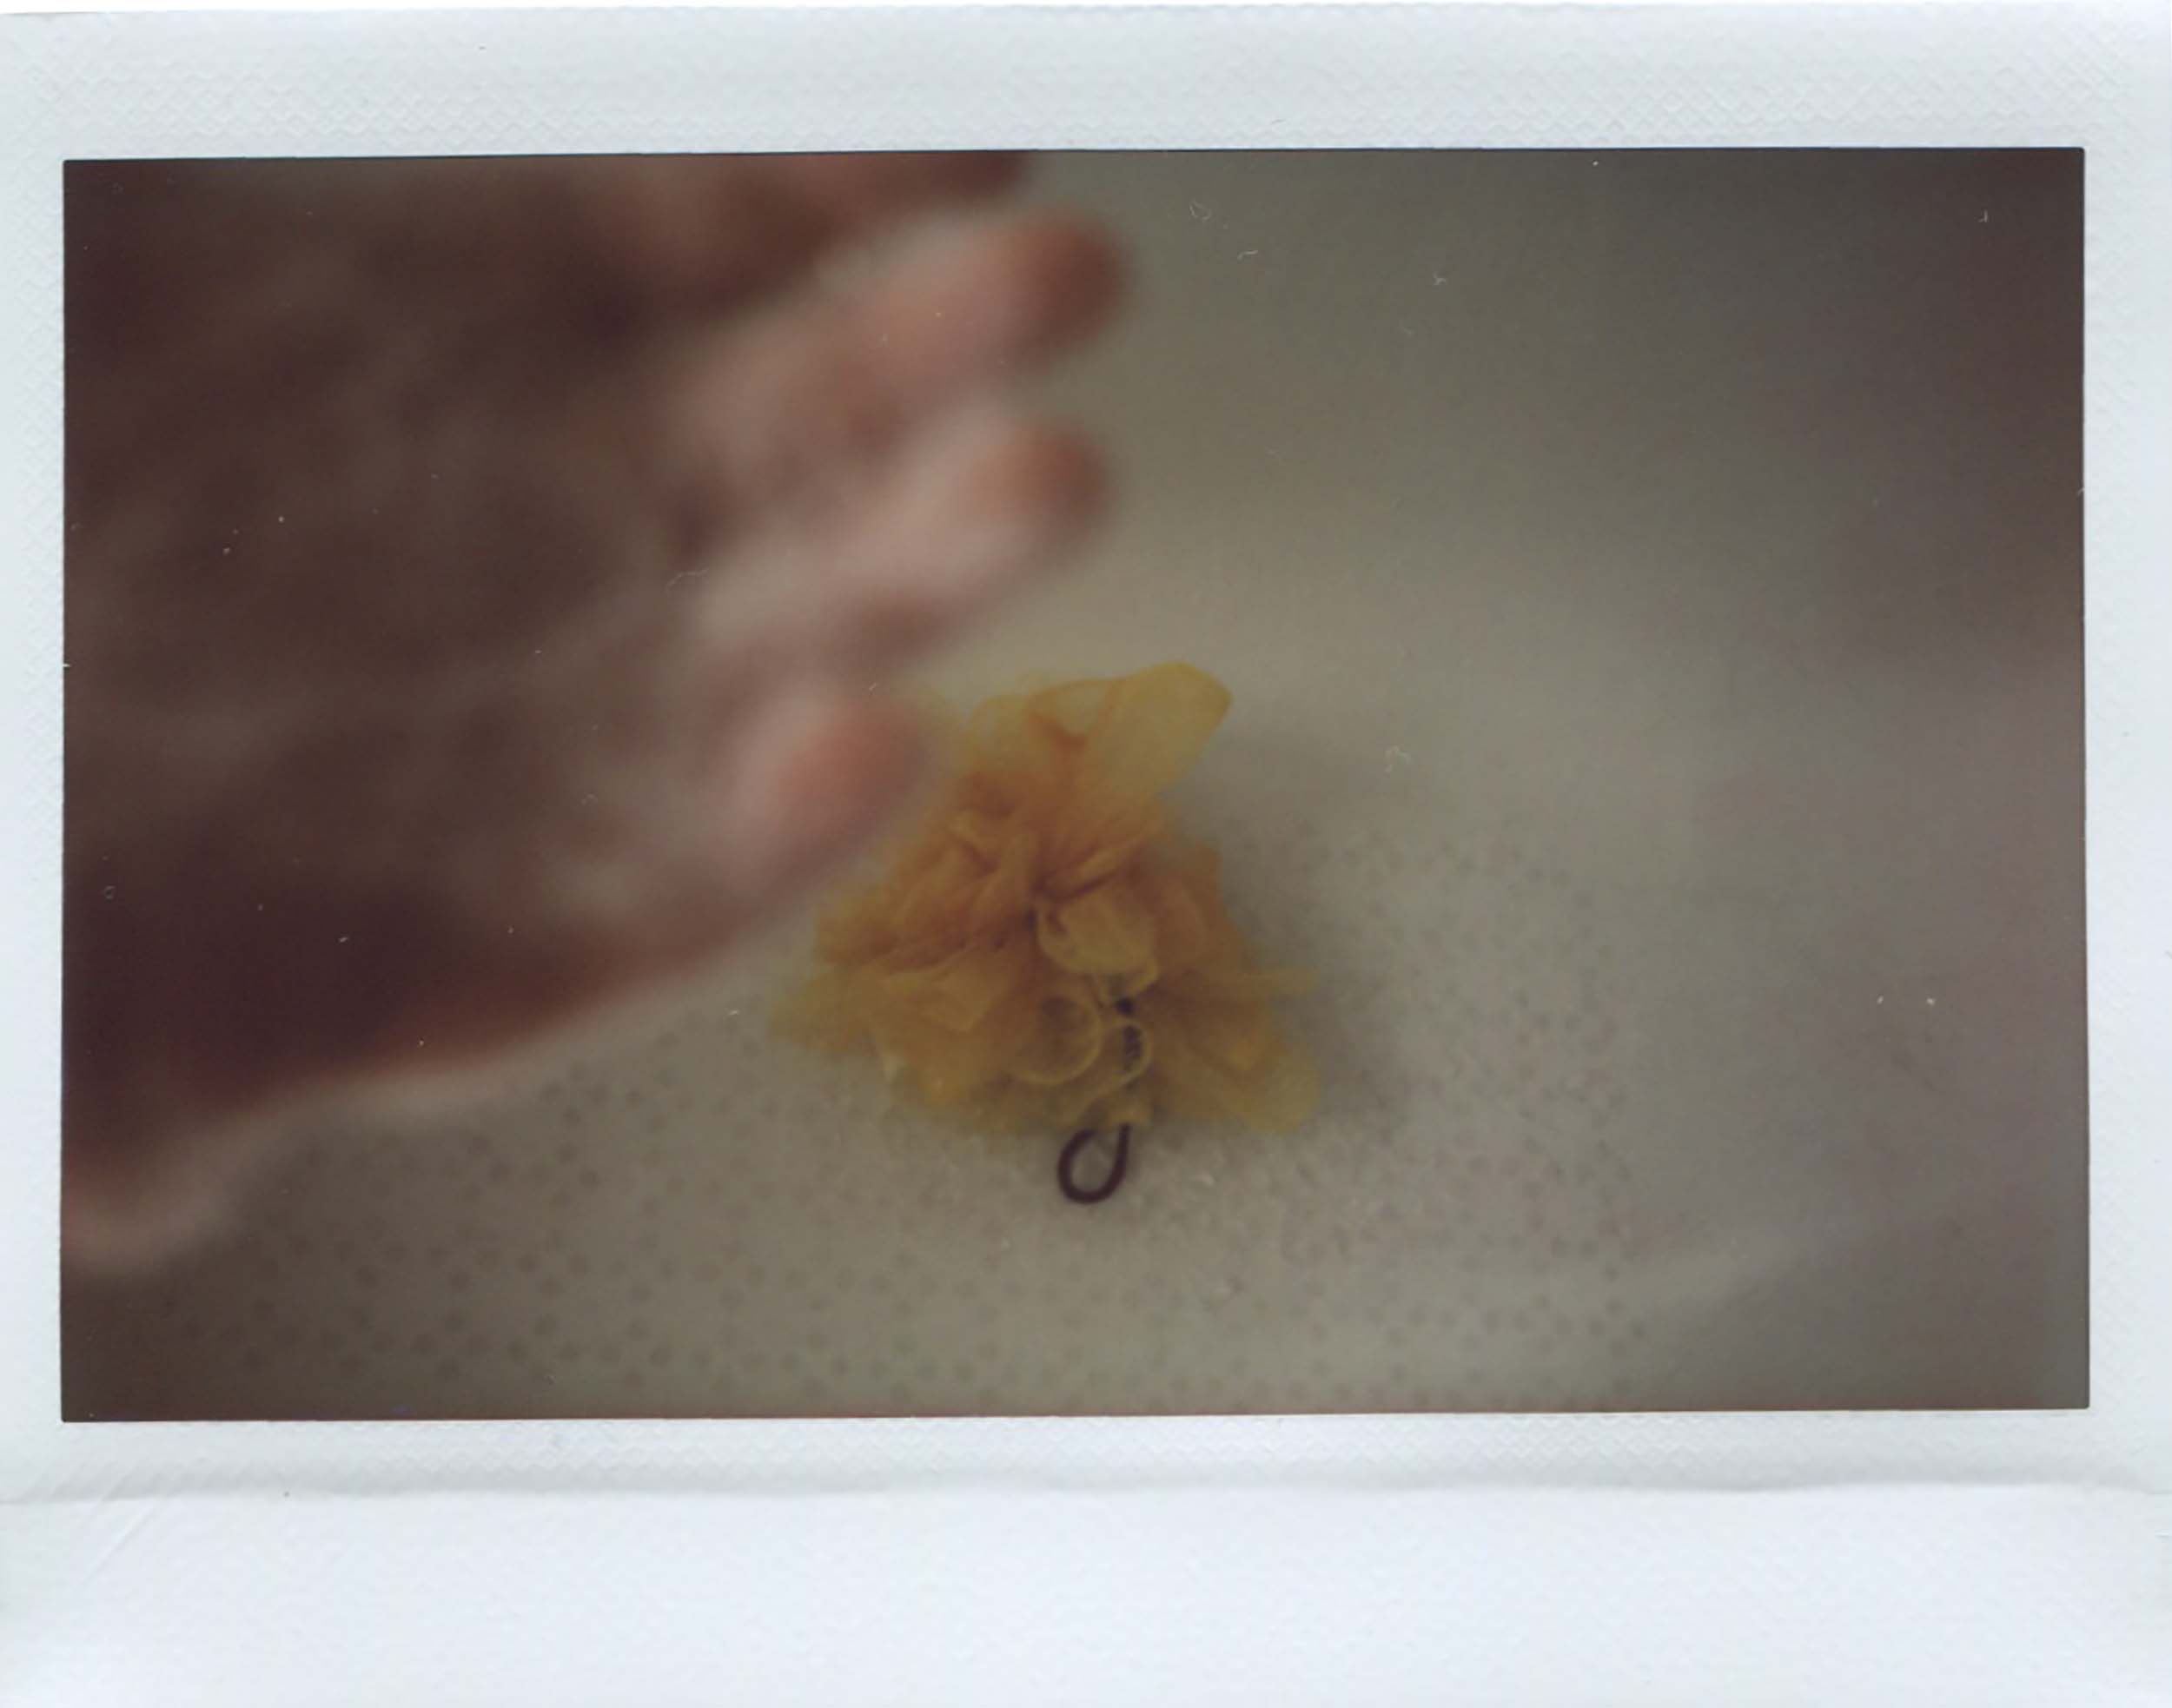 Instax Wide picture taken over a bath, left hand of the artist in the top left corner, out of focus but can see the bubbles. There's an orange body puff in the centre of the image.